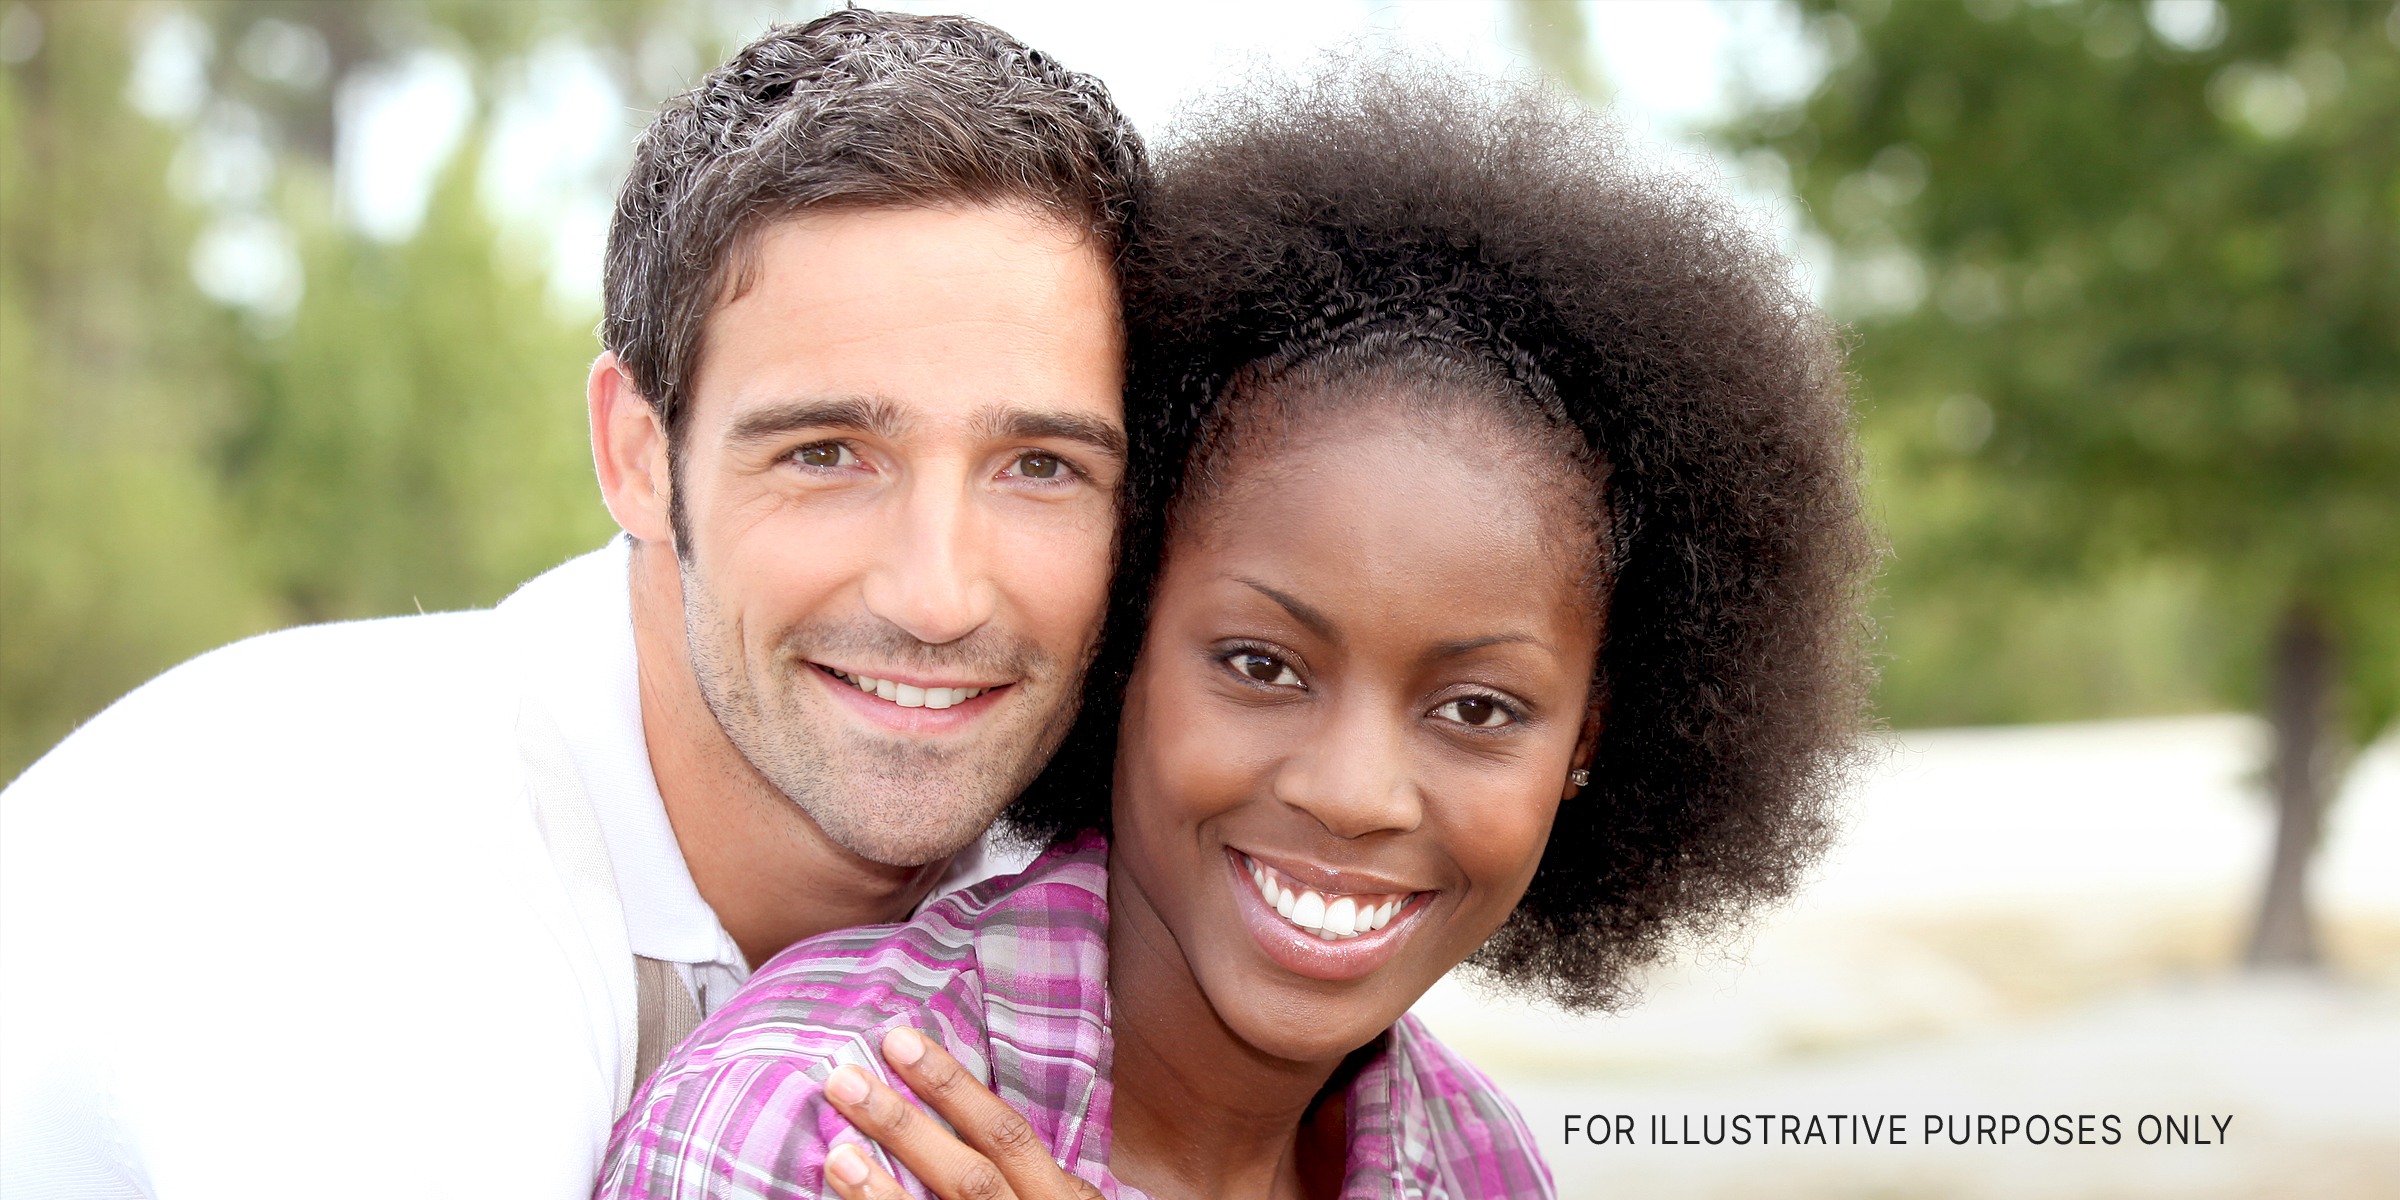 A white man with a black woman | Source: Shutterstock